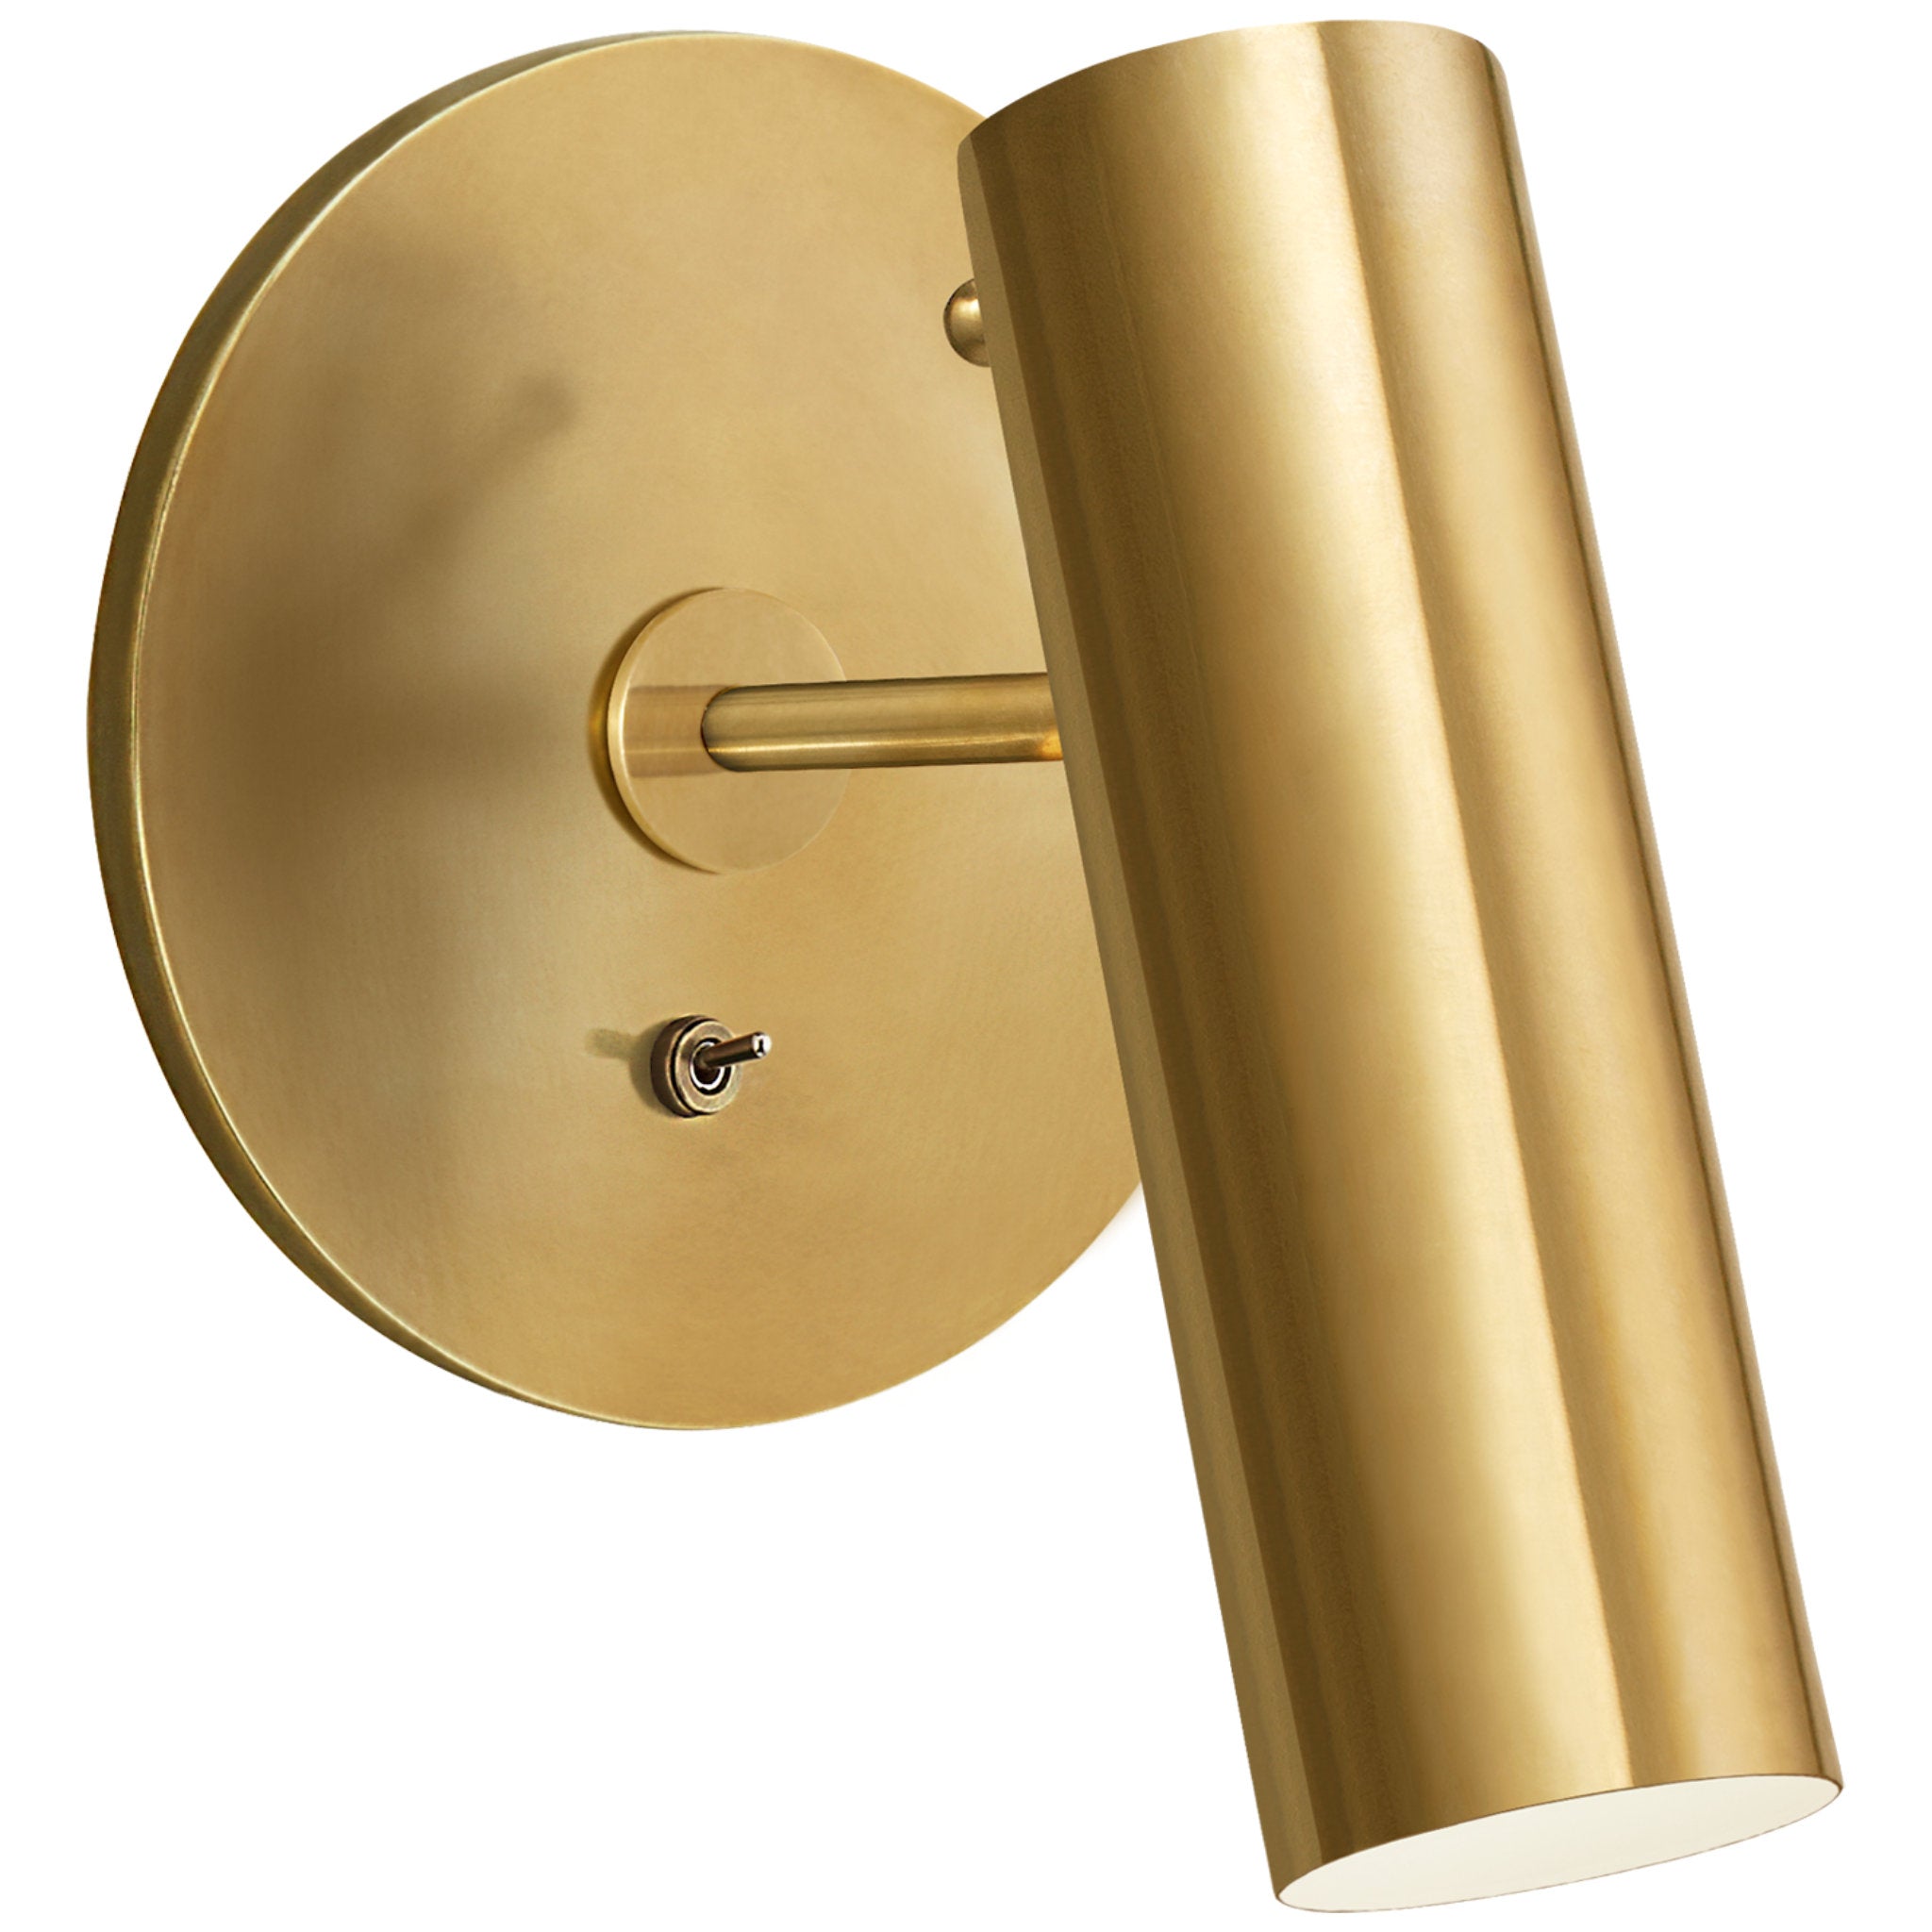 AERIN Clemente Wall Light in Hand-Rubbed Antique Brass